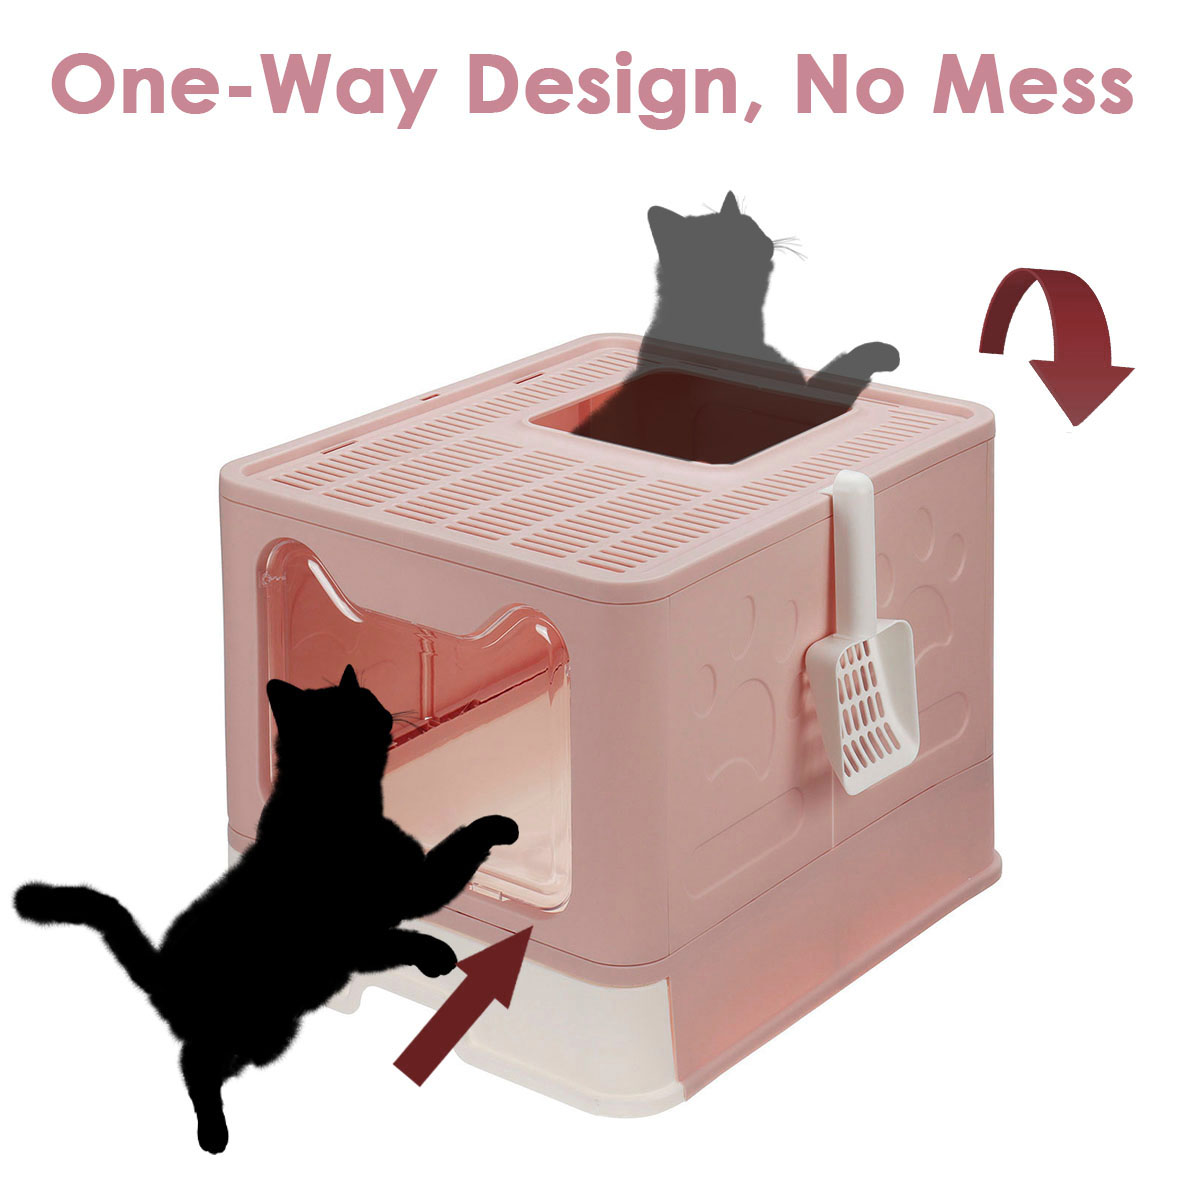 Hooded-Cat-Litter-Box-Enclosed-Large-Kitty-Toilet-Litter-Scoop-With-shovel-Foldable-Tray-Disassemble-1958677-4